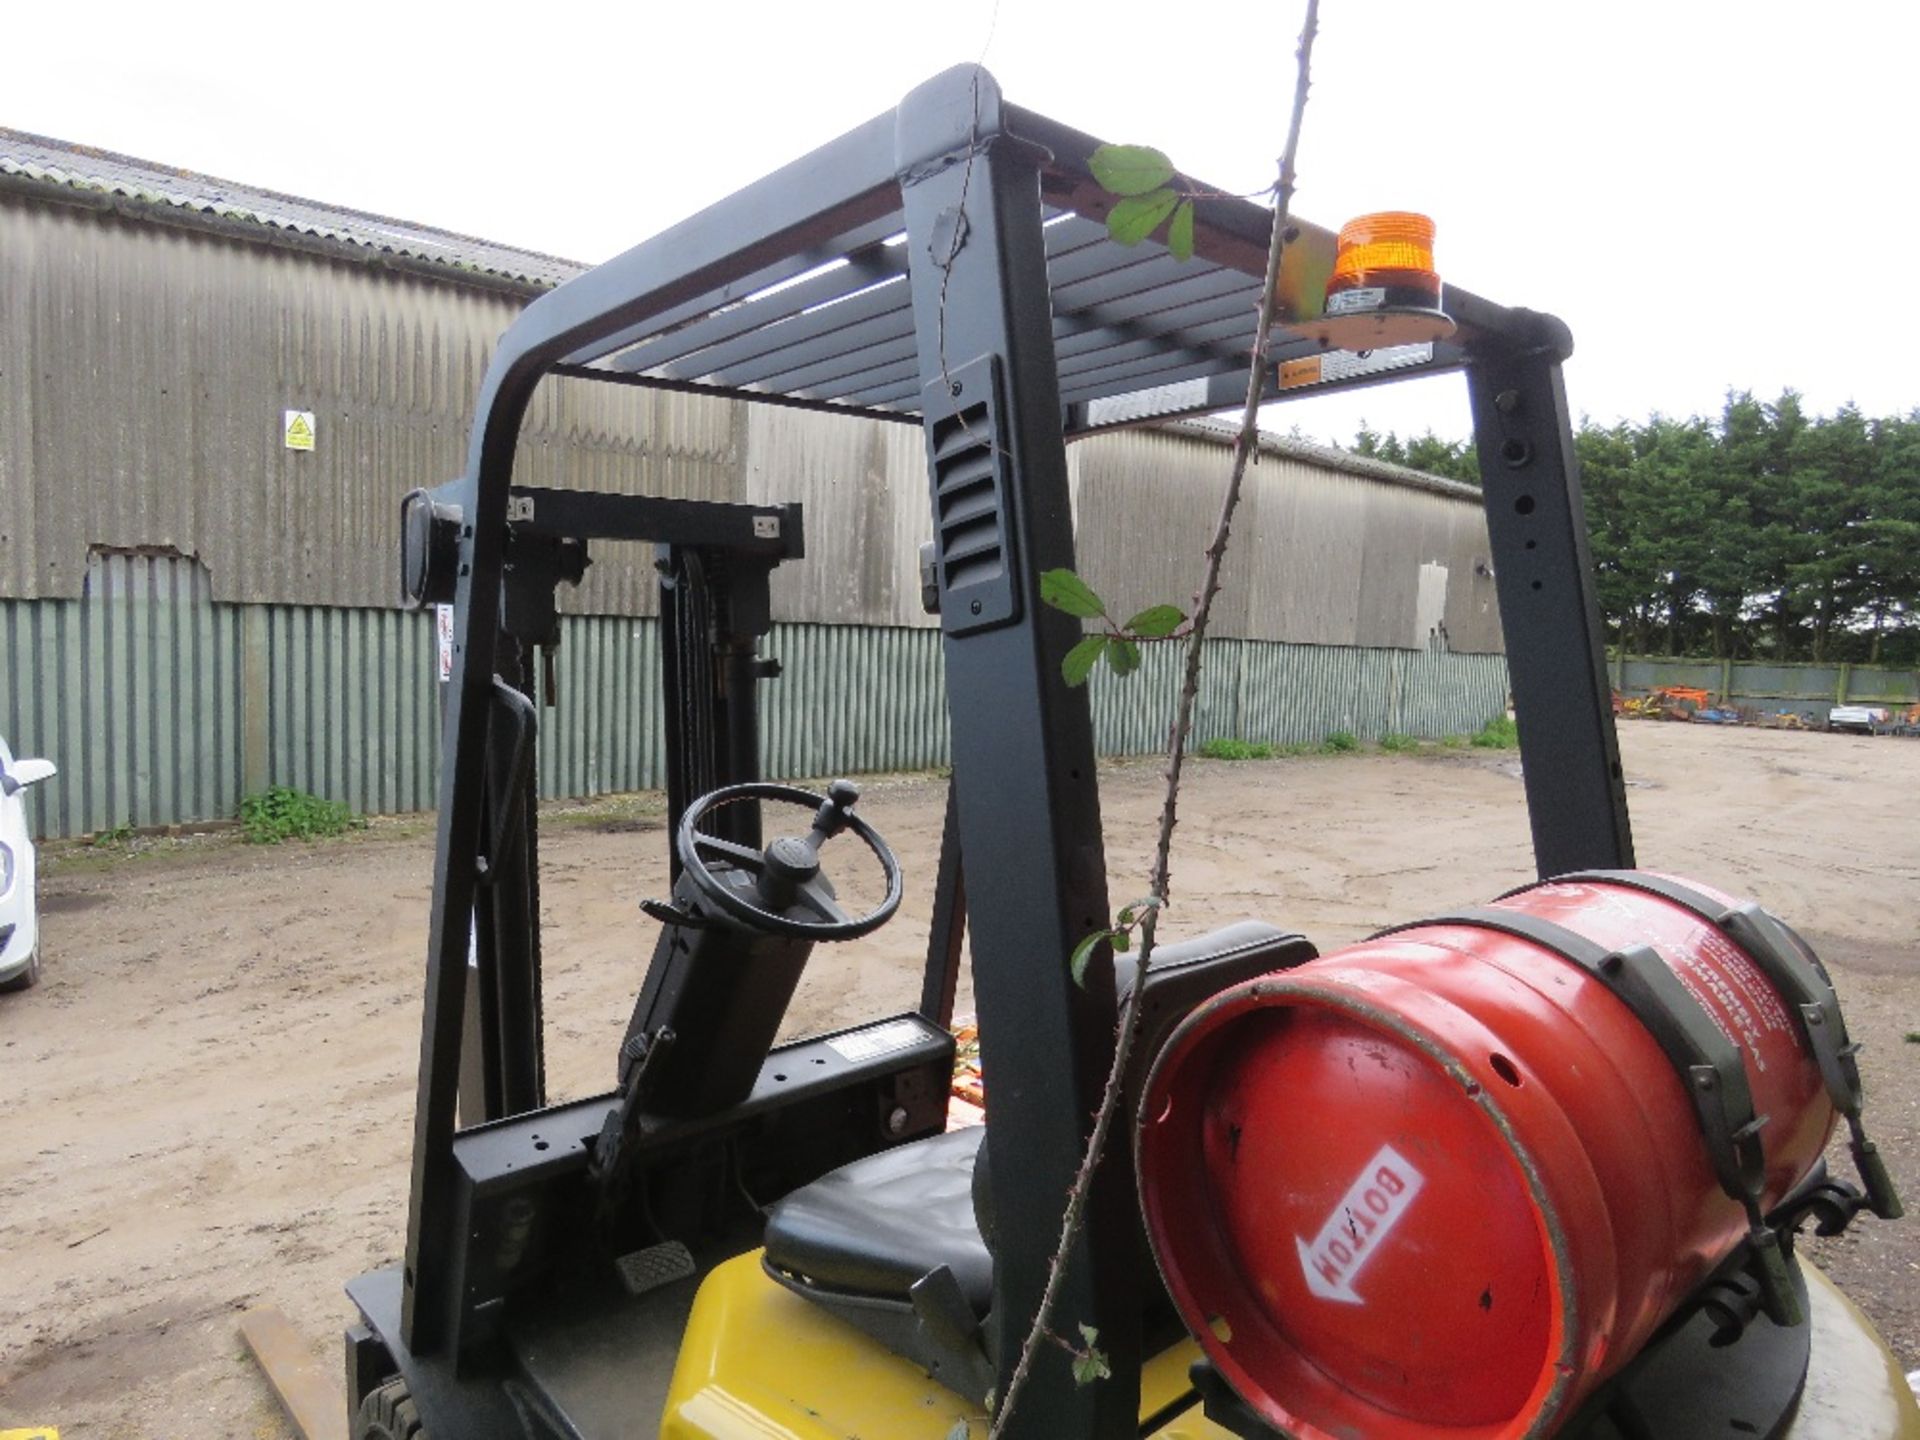 DAEWOO G18S-2 GAS POWERED FORKLIFT TRUCK WITH SIDE SHIFT. 1.8TONNE LIFT CAPACITY. 8136 REC HOURS. YE - Image 6 of 12